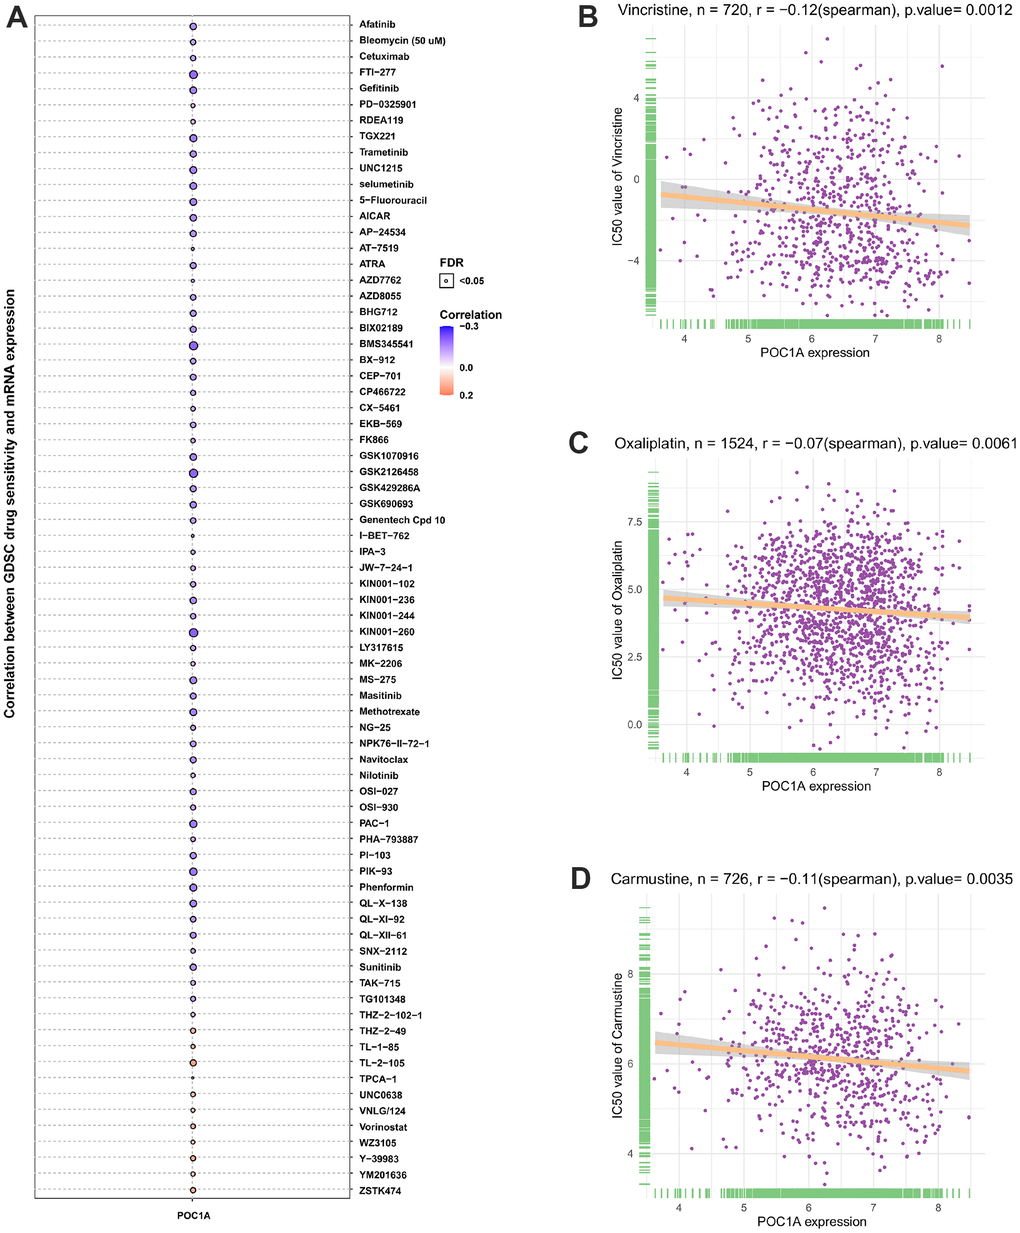 POC1A correlation with anticancer drugs IC50 values. (A–D) The correlation between POC1A expression and IC50 values of indicated anti-cancer drugs.